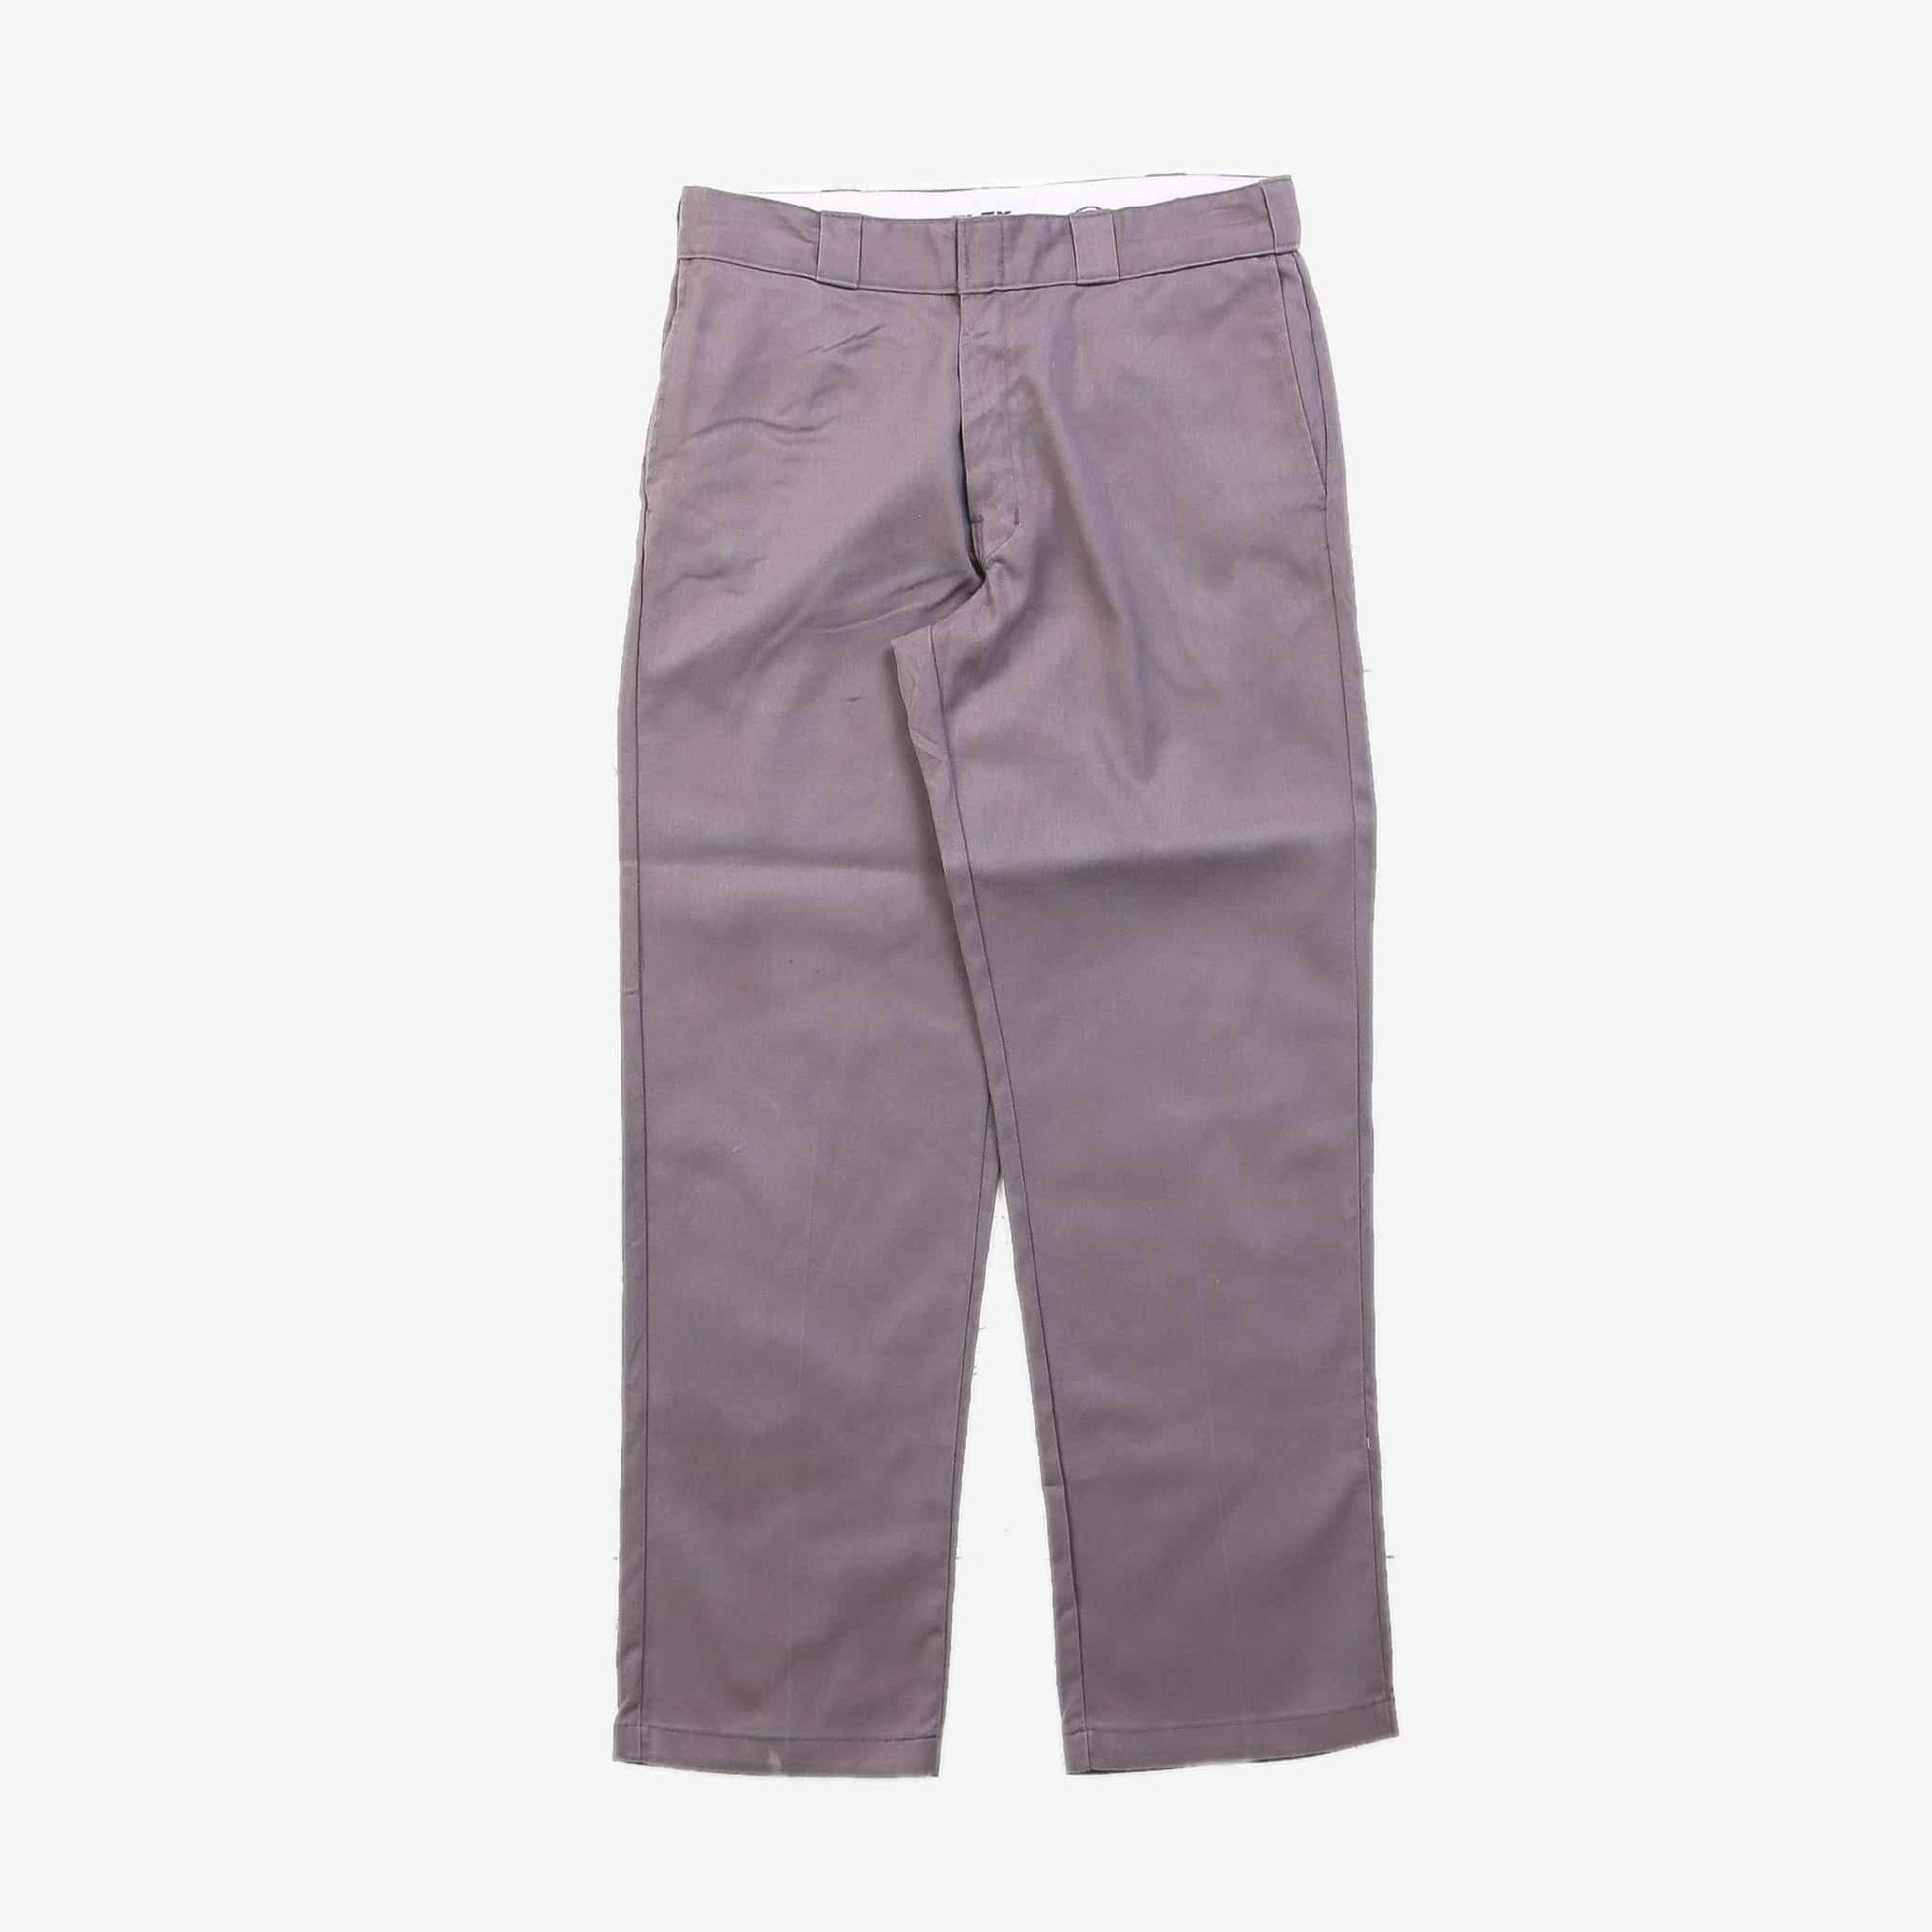 874 Work Trousers - Grey - 32/34 - American Madness